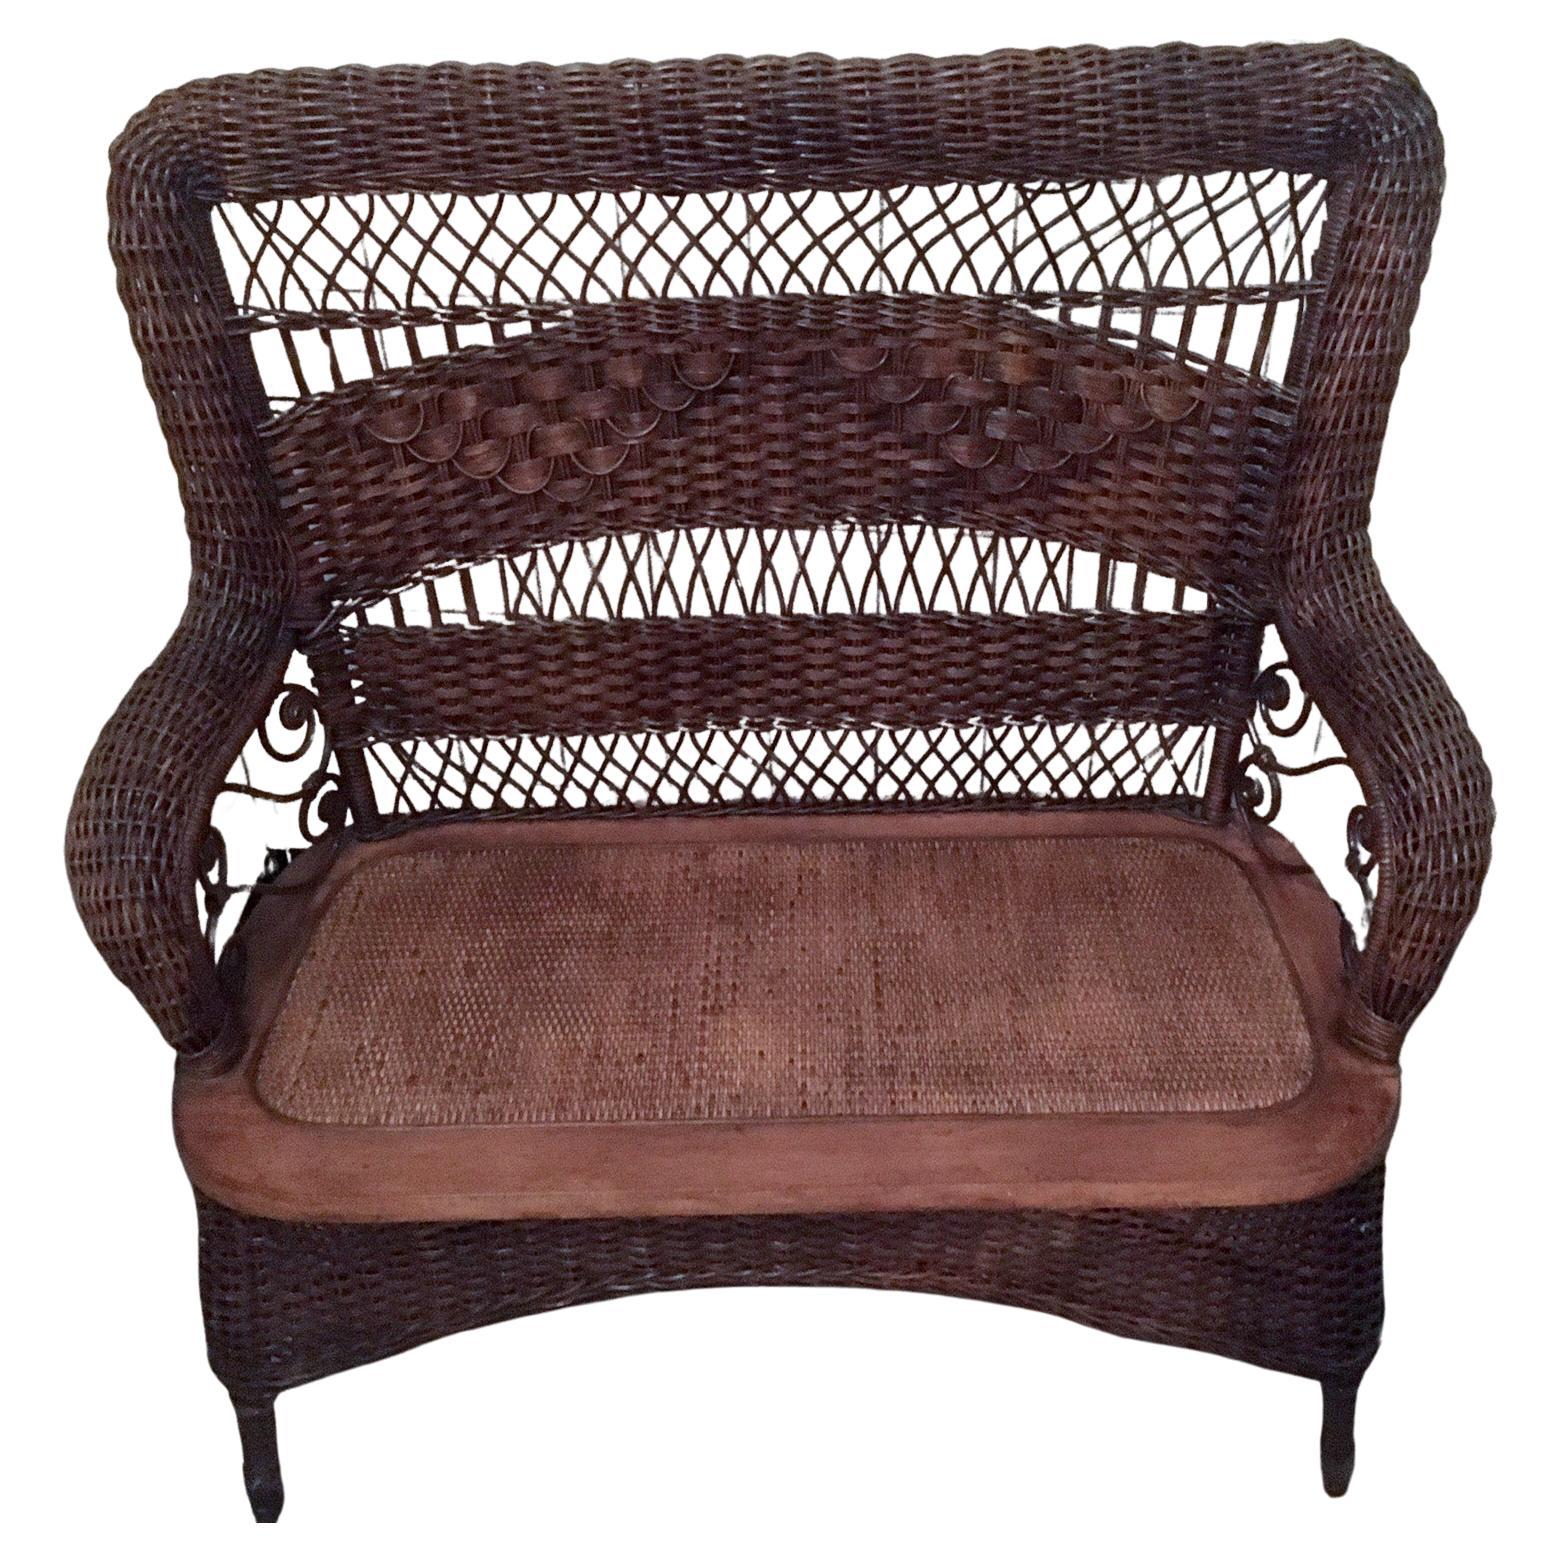 Antique Wicker Heywood Wakefield Settee with Original Natural Finish circa 1900 For Sale